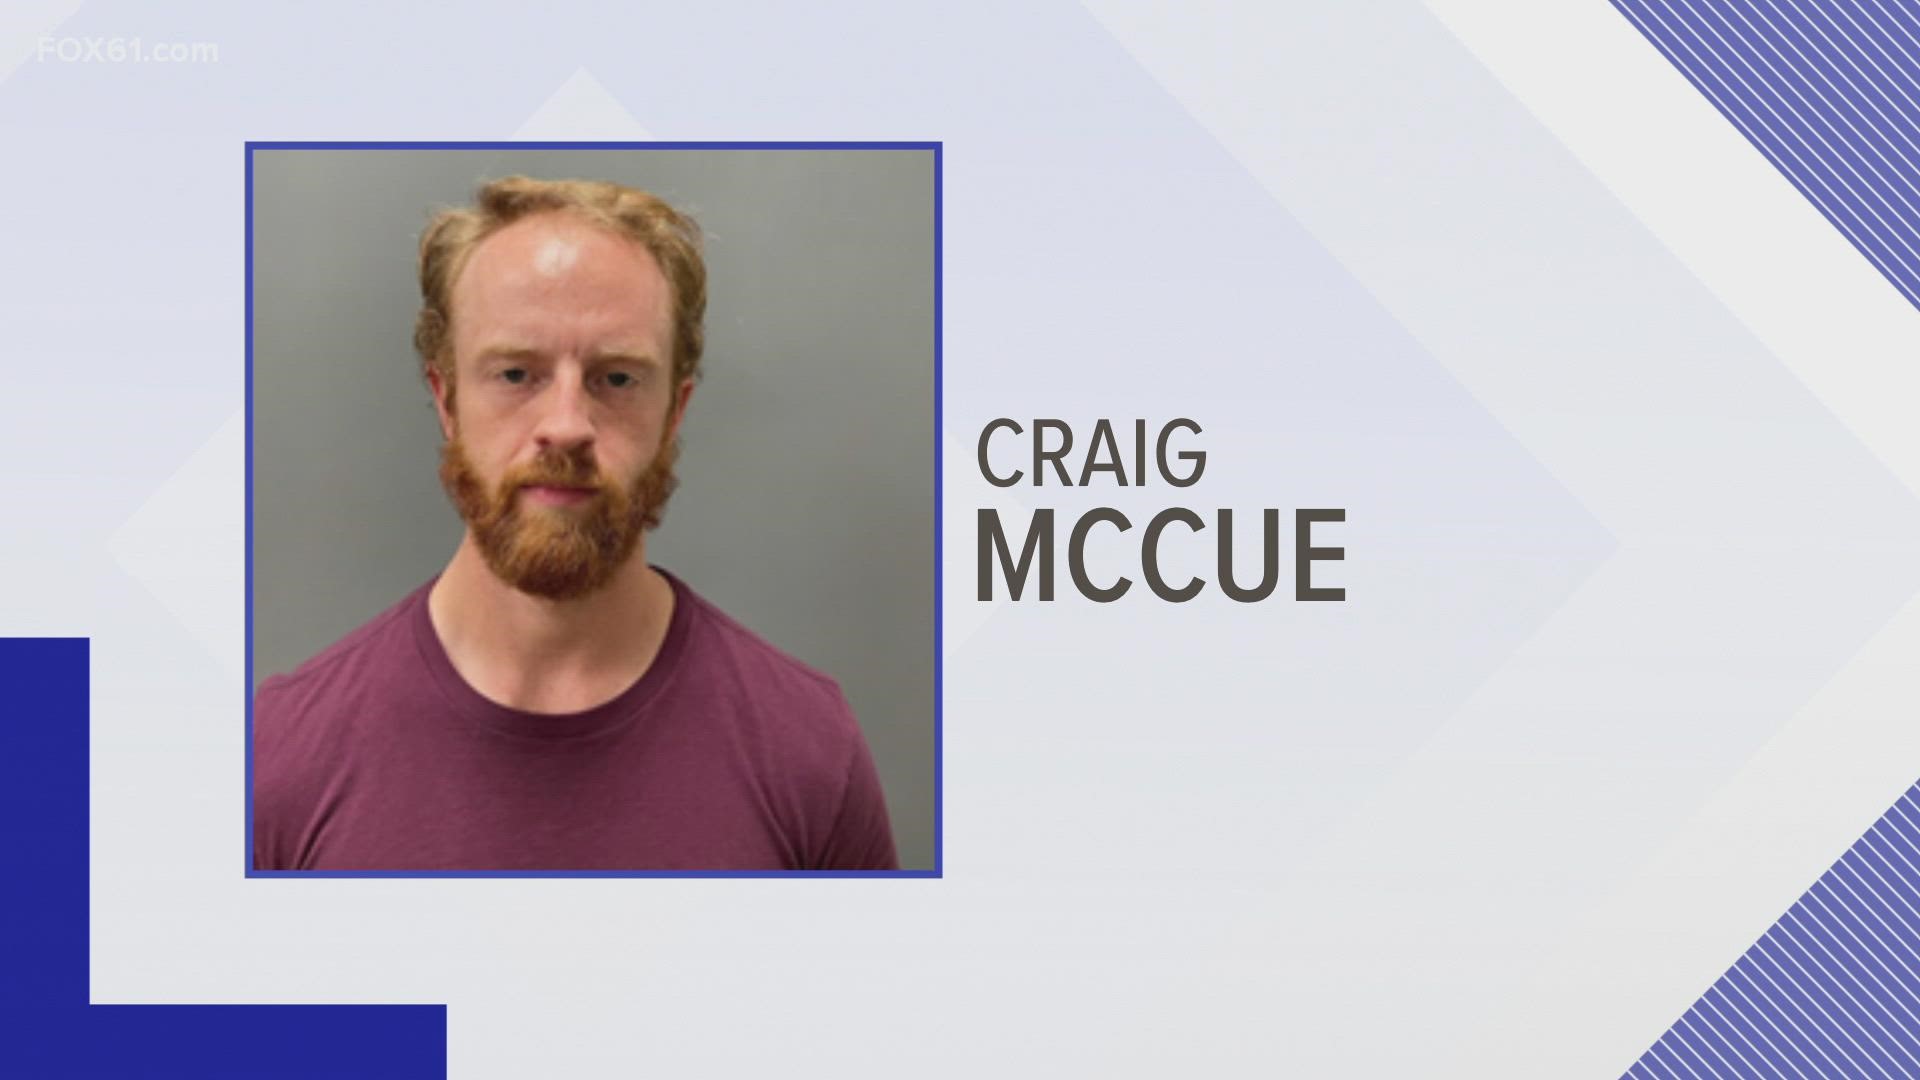 An investigation began back in May after police said a concerned parent complained about finding inappropriate text messages from Craig McCue on their child’s phone.